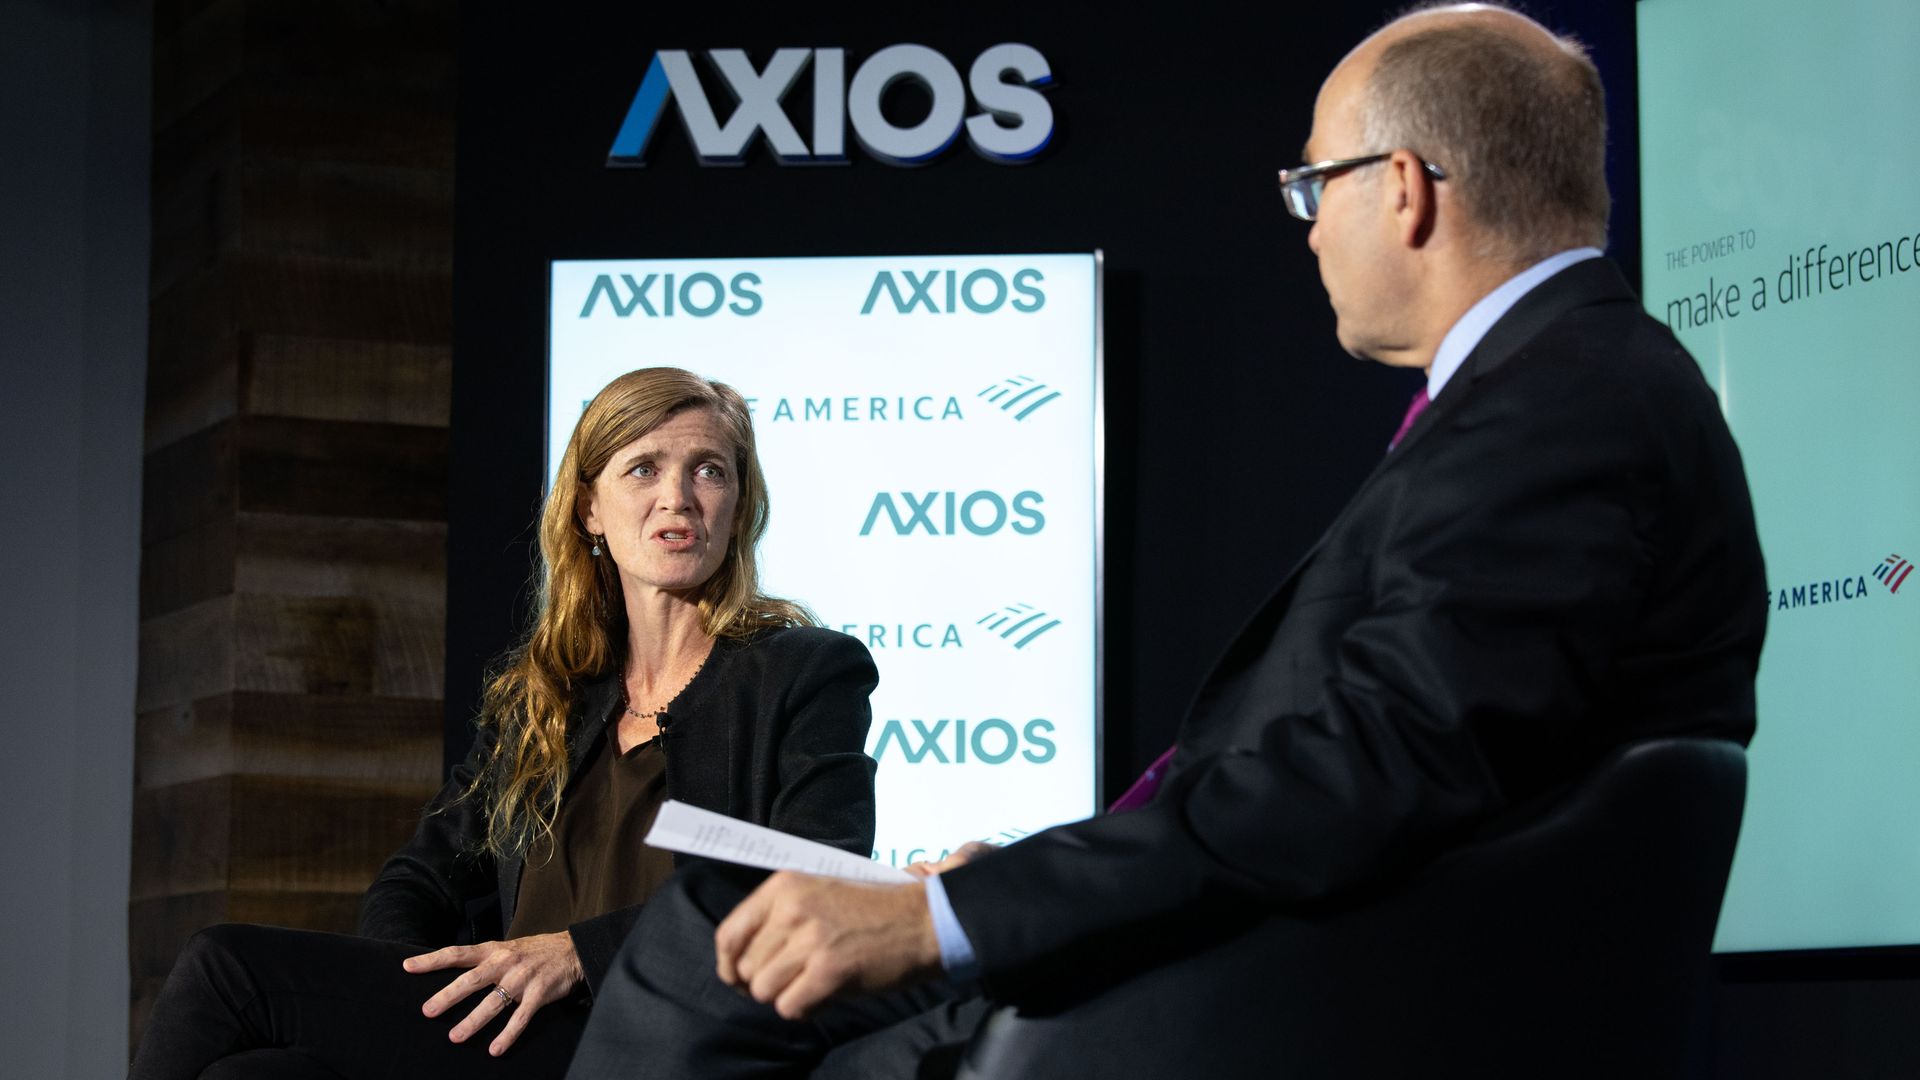 Left, Samantha Power on the Axios stage, with Mike Allen, right. 